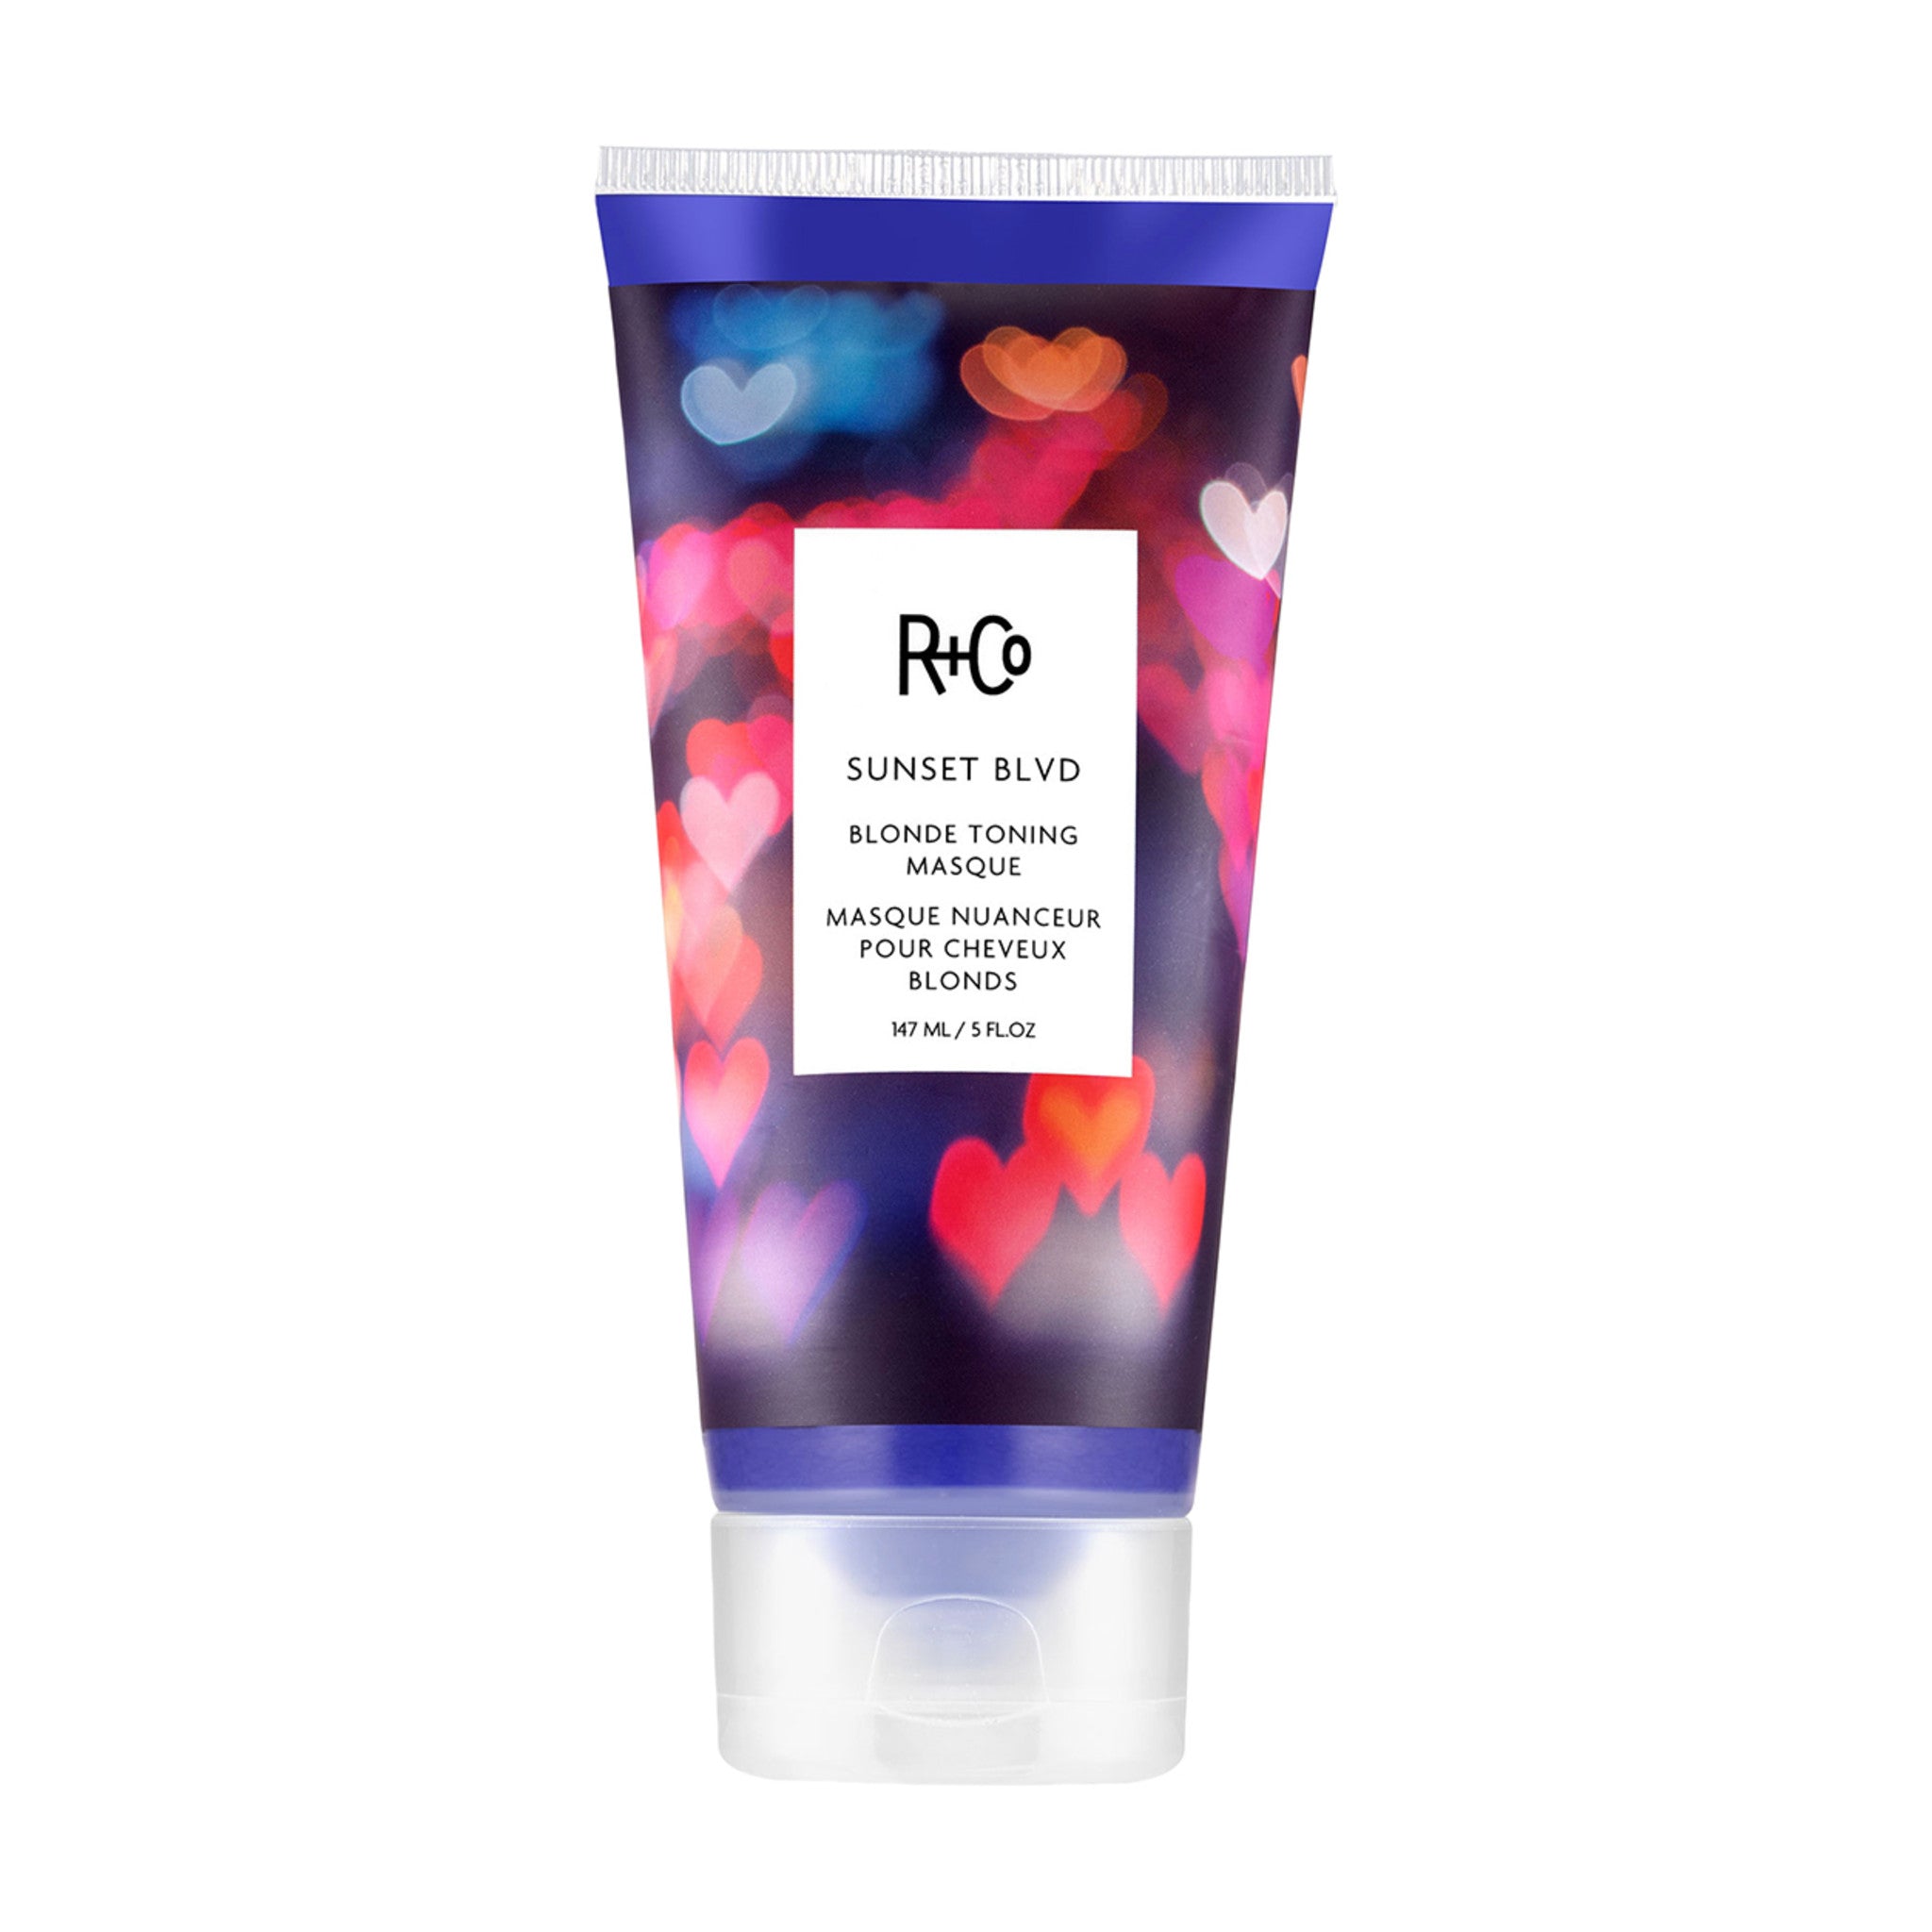 R+Co Sunset Blvd Blonde Toning Masque main image. This product is for blonde hair